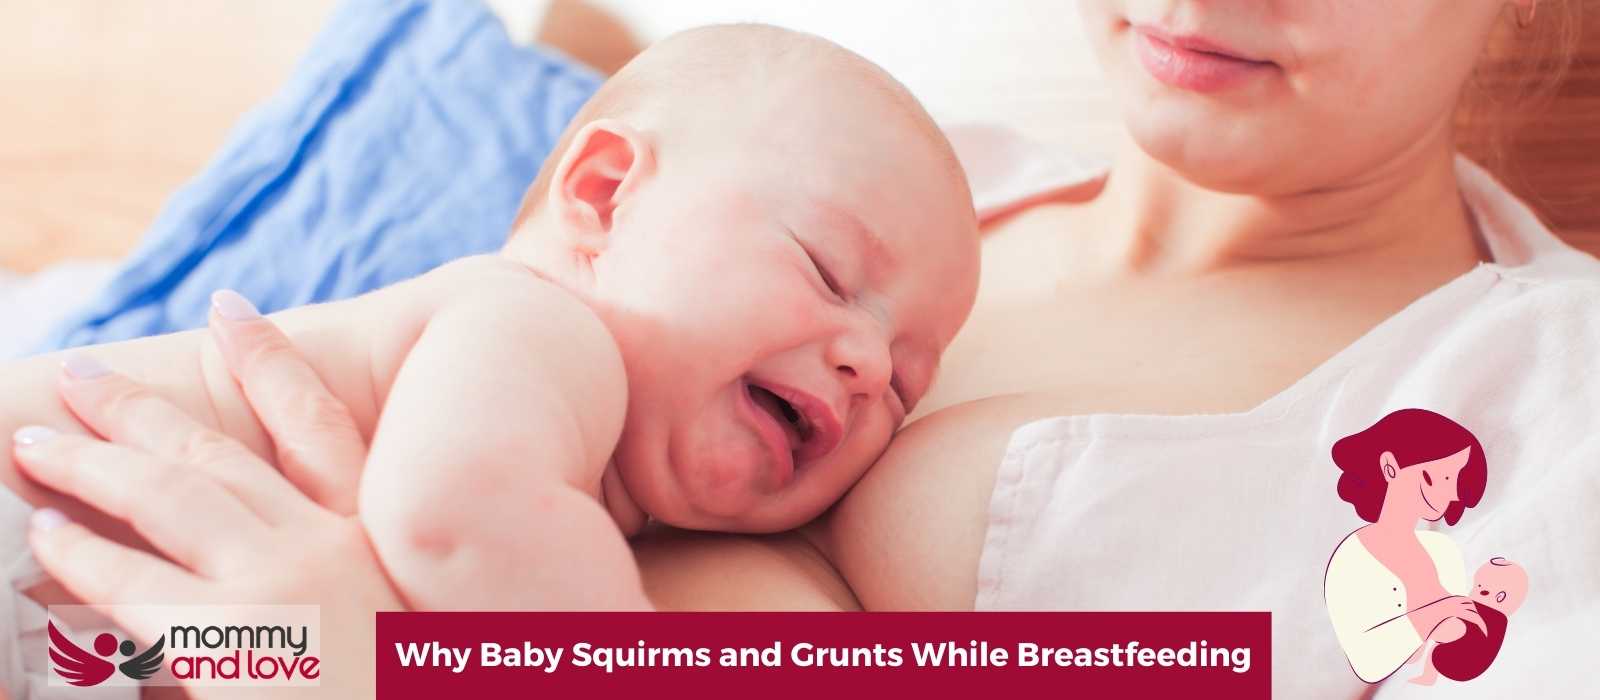 Why Baby Squirms and Grunts While Breastfeeding